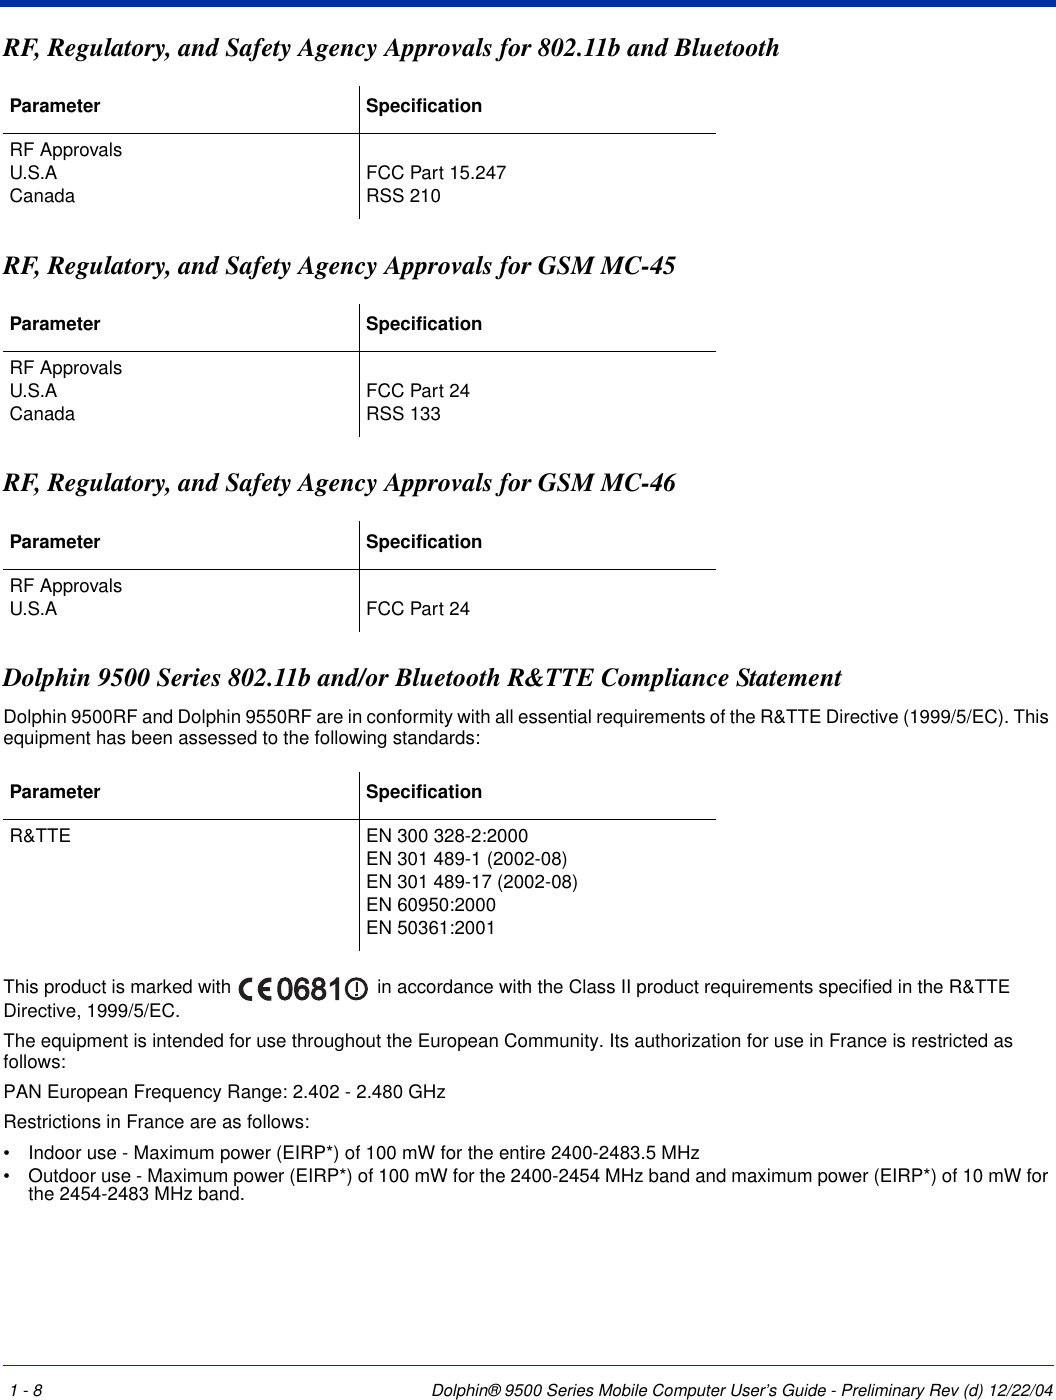 1 - 8 Dolphin® 9500 Series Mobile Computer User’s Guide - Preliminary Rev (d) 12/22/04RF, Regulatory, and Safety Agency Approvals for 802.11b and Bluetooth RF, Regulatory, and Safety Agency Approvals for GSM MC-45RF, Regulatory, and Safety Agency Approvals for GSM MC-46Dolphin 9500 Series 802.11b and/or Bluetooth R&amp;TTE Compliance StatementDolphin 9500RF and Dolphin 9550RF are in conformity with all essential requirements of the R&amp;TTE Directive (1999/5/EC). This equipment has been assessed to the following standards:This product is marked with   in accordance with the Class II product requirements specified in the R&amp;TTE Directive, 1999/5/EC.The equipment is intended for use throughout the European Community. Its authorization for use in France is restricted as follows:PAN European Frequency Range: 2.402 - 2.480 GHzRestrictions in France are as follows: •           Indoor use - Maximum power (EIRP*) of 100 mW for the entire 2400-2483.5 MHz •           Outdoor use - Maximum power (EIRP*) of 100 mW for the 2400-2454 MHz band and maximum power (EIRP*) of 10 mW for the 2454-2483 MHz band.Parameter SpecificationRF ApprovalsU.S.ACanada FCC Part 15.247RSS 210 Parameter SpecificationRF ApprovalsU.S.ACanada FCC Part 24RSS 133Parameter SpecificationRF ApprovalsU.S.A FCC Part 24Parameter SpecificationR&amp;TTE EN 300 328-2:2000EN 301 489-1 (2002-08)EN 301 489-17 (2002-08)EN 60950:2000EN 50361:2001